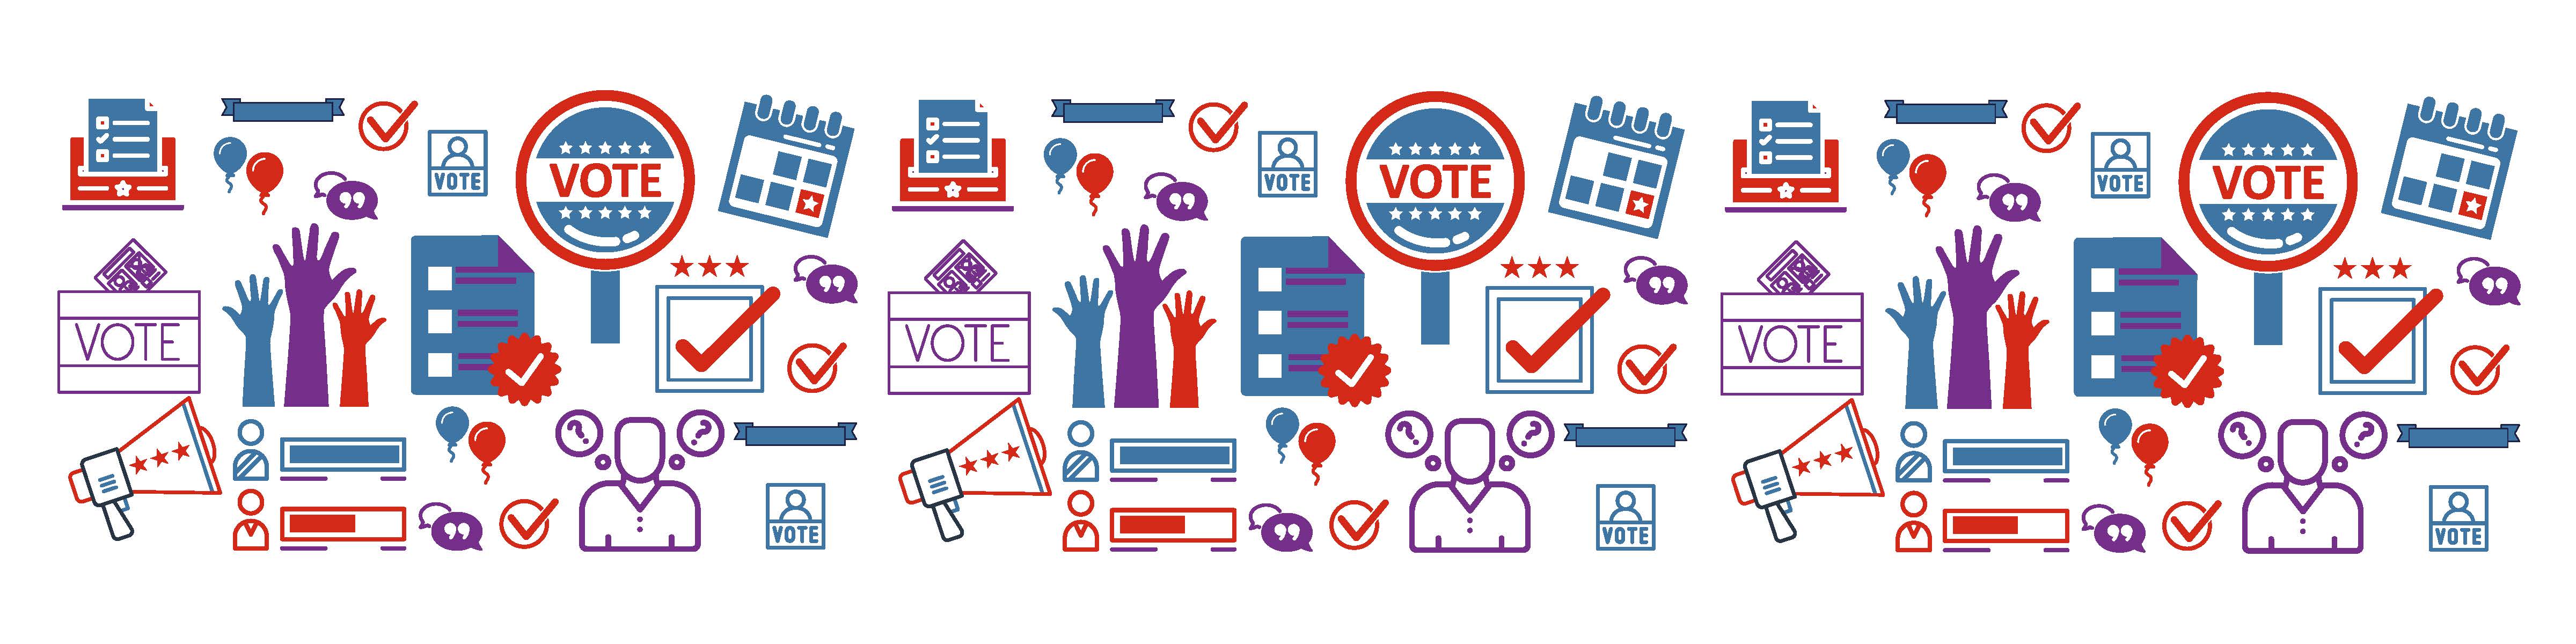 Mount Union to Host Virtual Voting Panel with Election Officials March 25